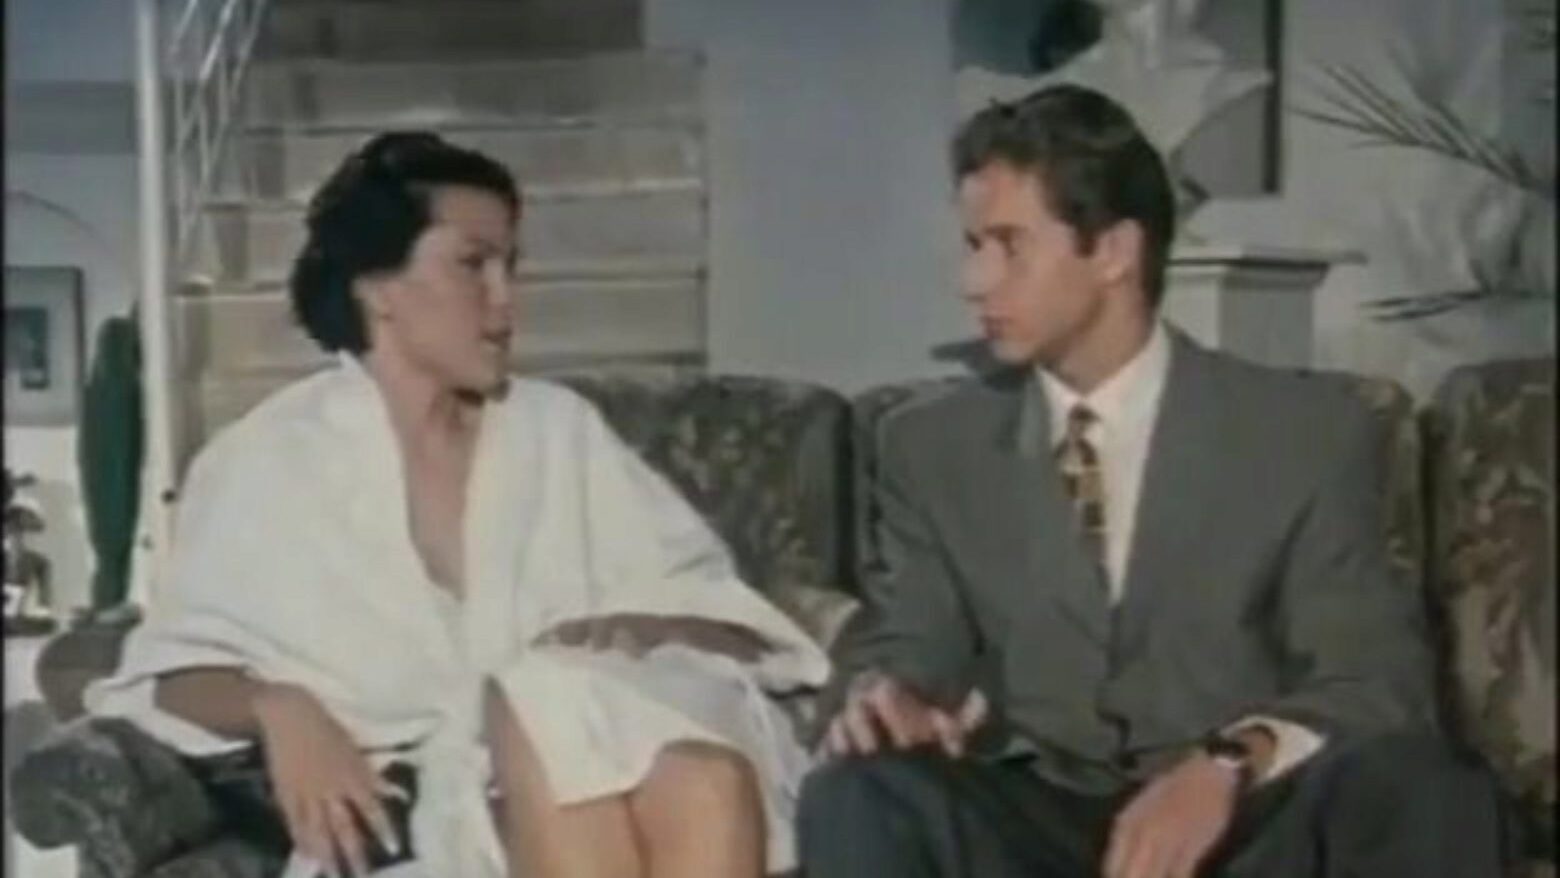 Stepmom Cheating Her Spouse with Son Vintage Video: Porn 5a See Stepmom Cheating Her Spouse with Son Vintage Movie Scene episode on xHamster - the ultimate archive of free Italian mother I'd like to plow HD hardcore porno tube movie scenes